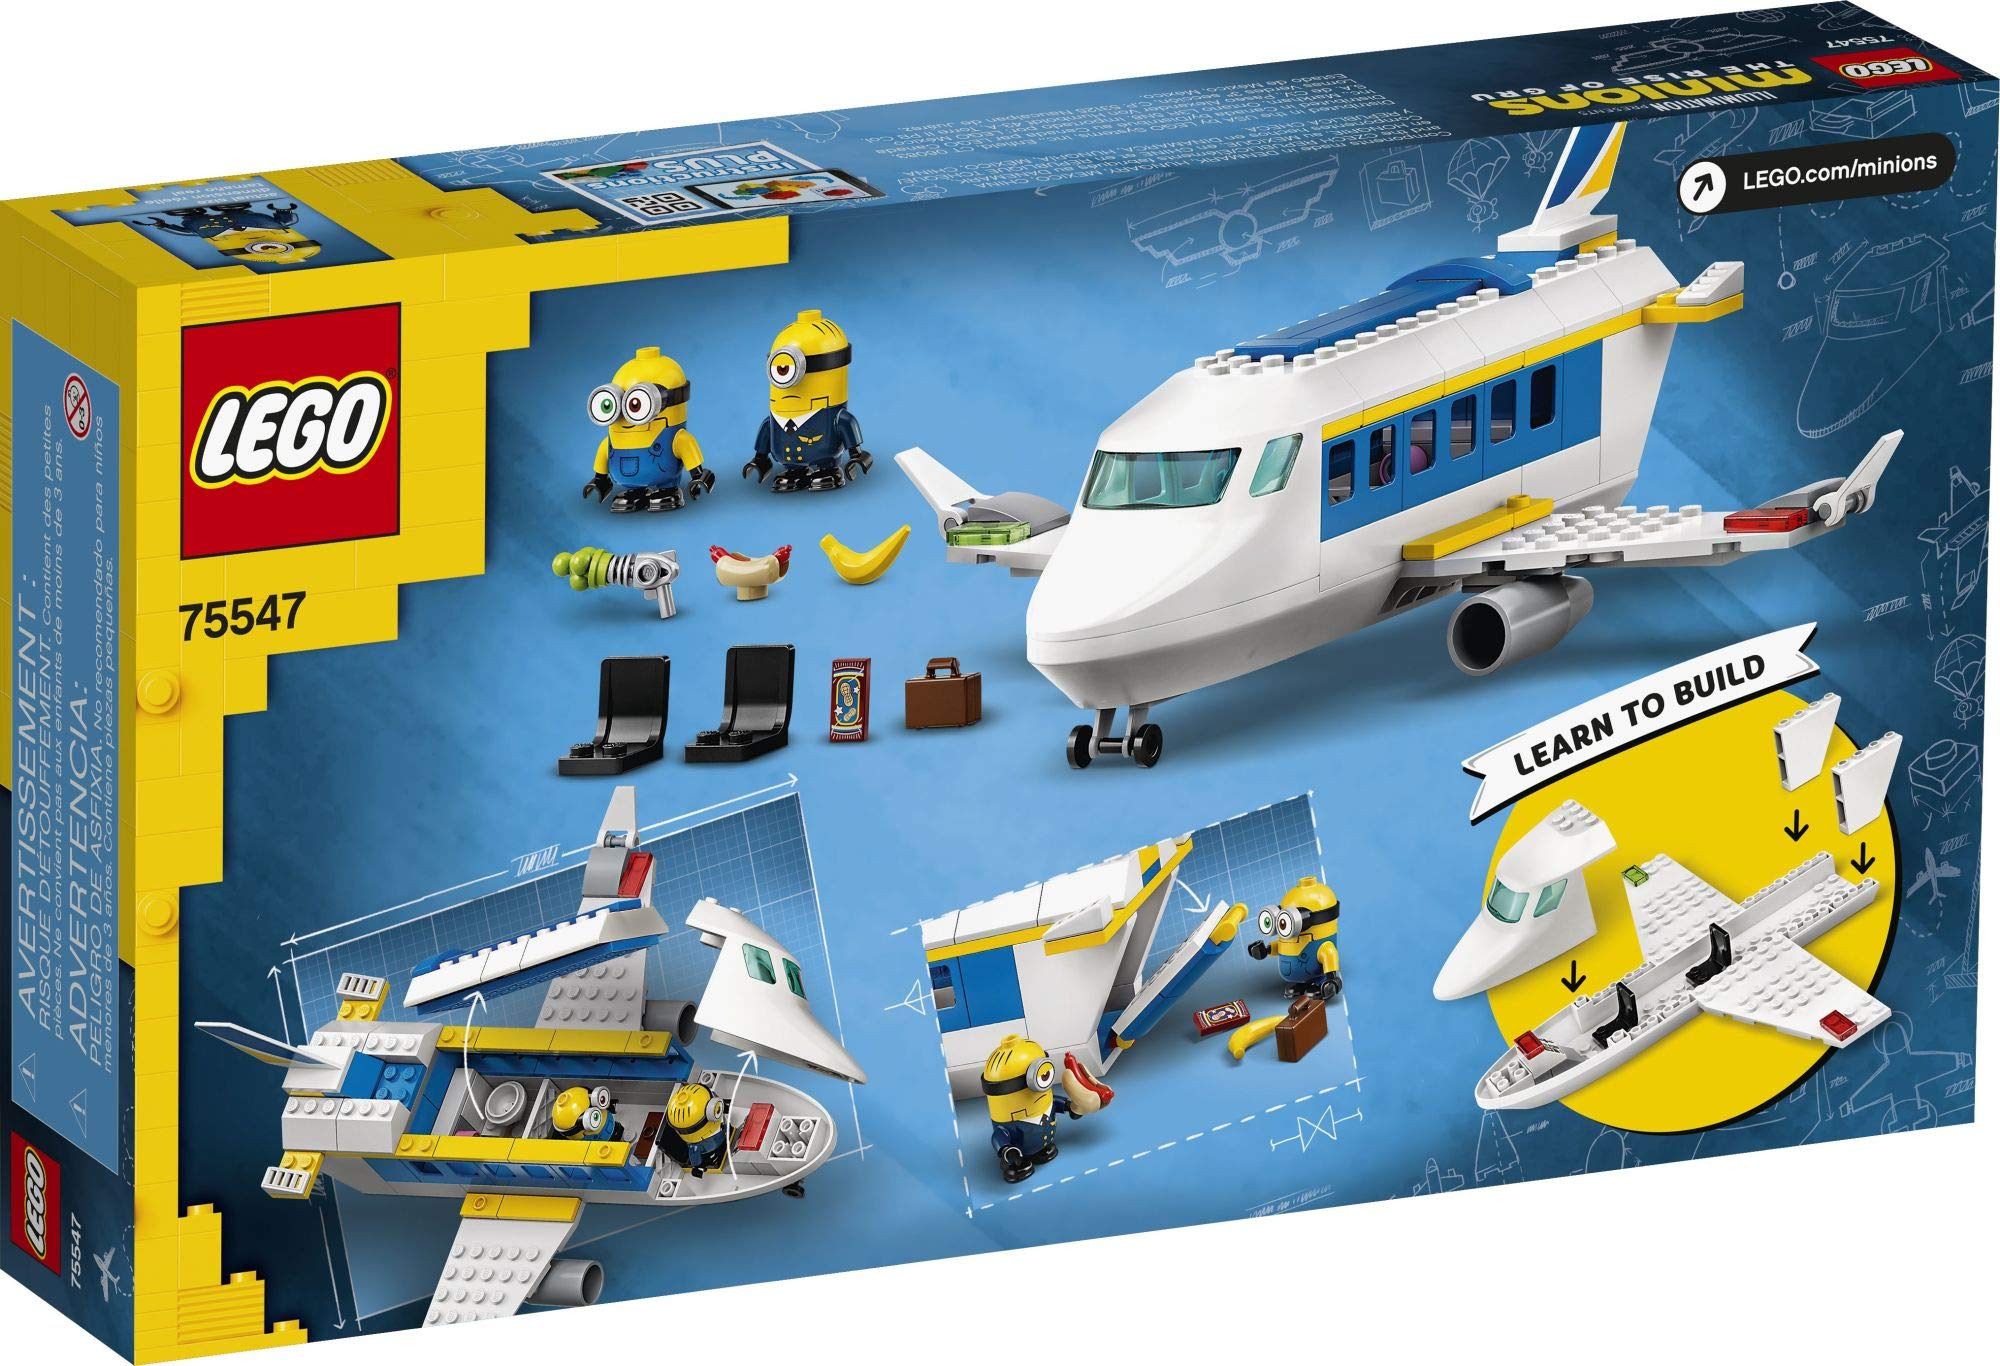 LEGO Minions: The Rise of Gru: Minion Pilot in Training (75547) Toy Plane Building Kit for Kids, a Great Present for Kids Who Love Minions Toys and Minion Figures, New 2021 (119 Pieces)